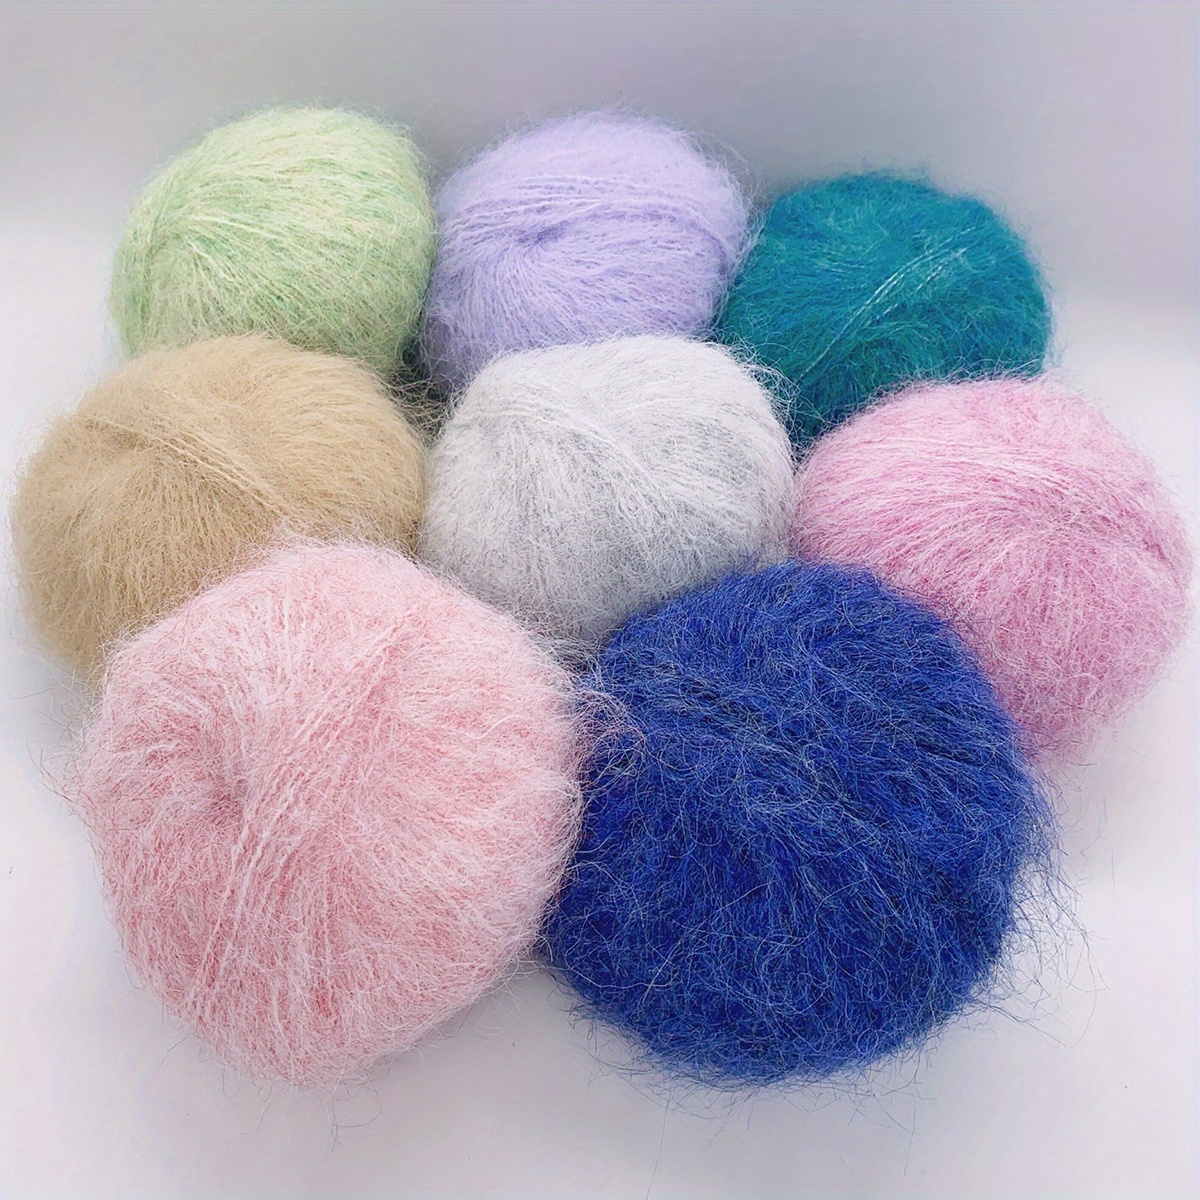 50% Wool Yarn for Crocheting,Thick Yarn for Crocheting,Crochet Yarn for  Crocheting,Yarn for Crafts,Crochet Yarn for Sweater,Scarf,Hat(Baby Pink)